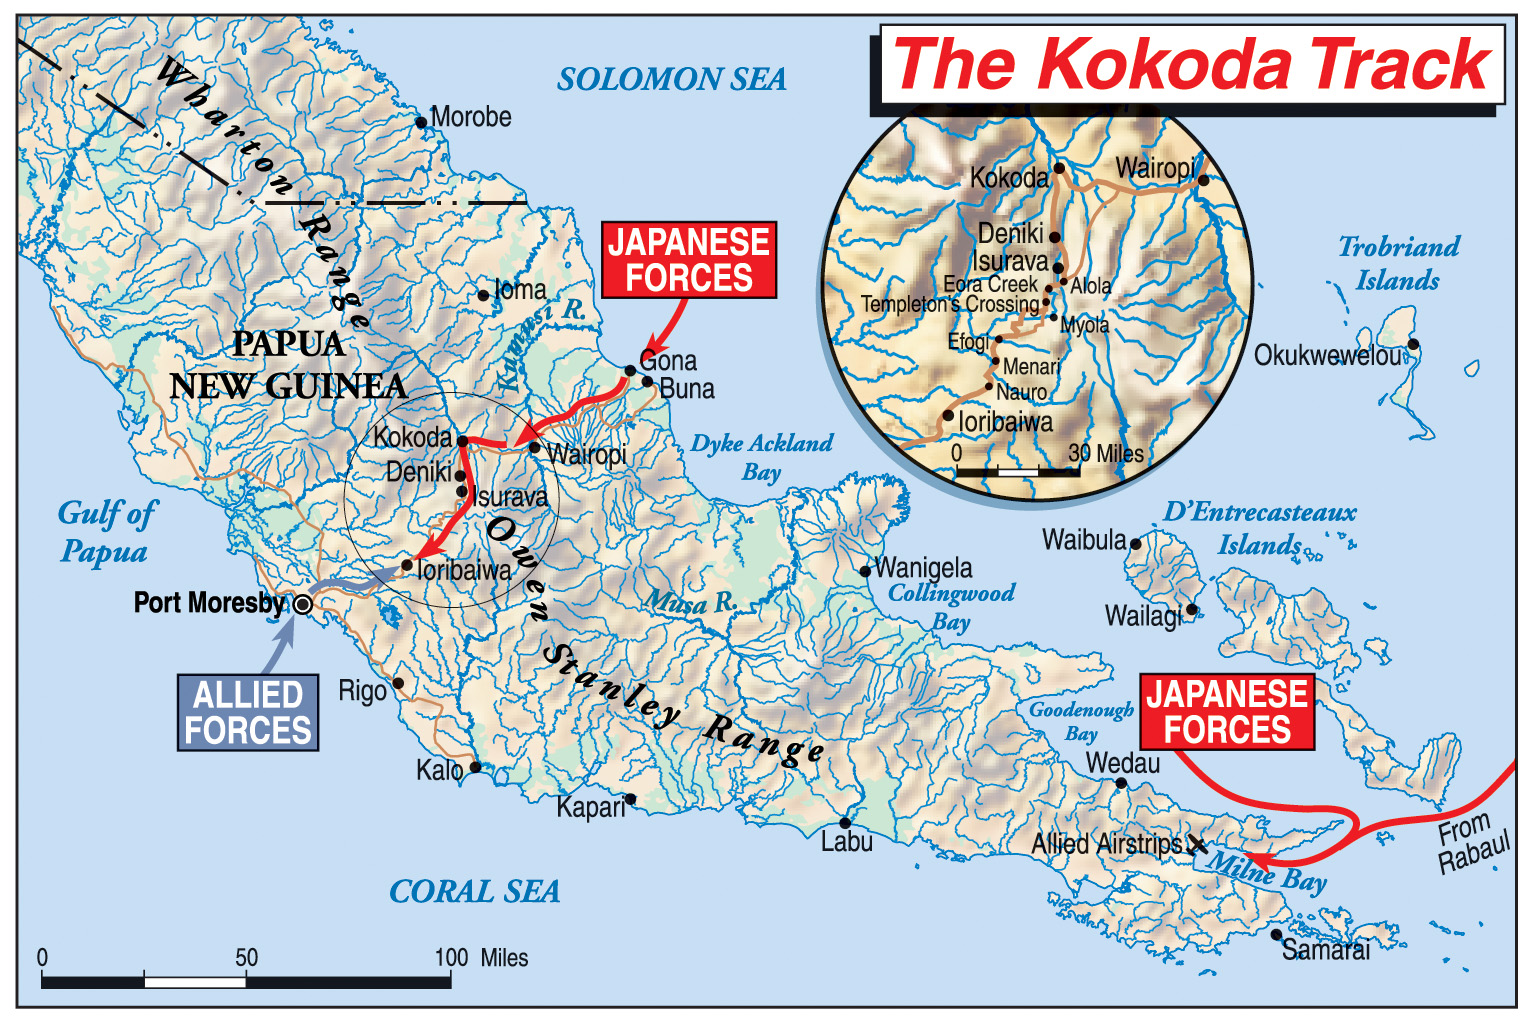 The Kokoda Track traversed the steep Owen Stanley Range. Milne Bay lay to the south and east.